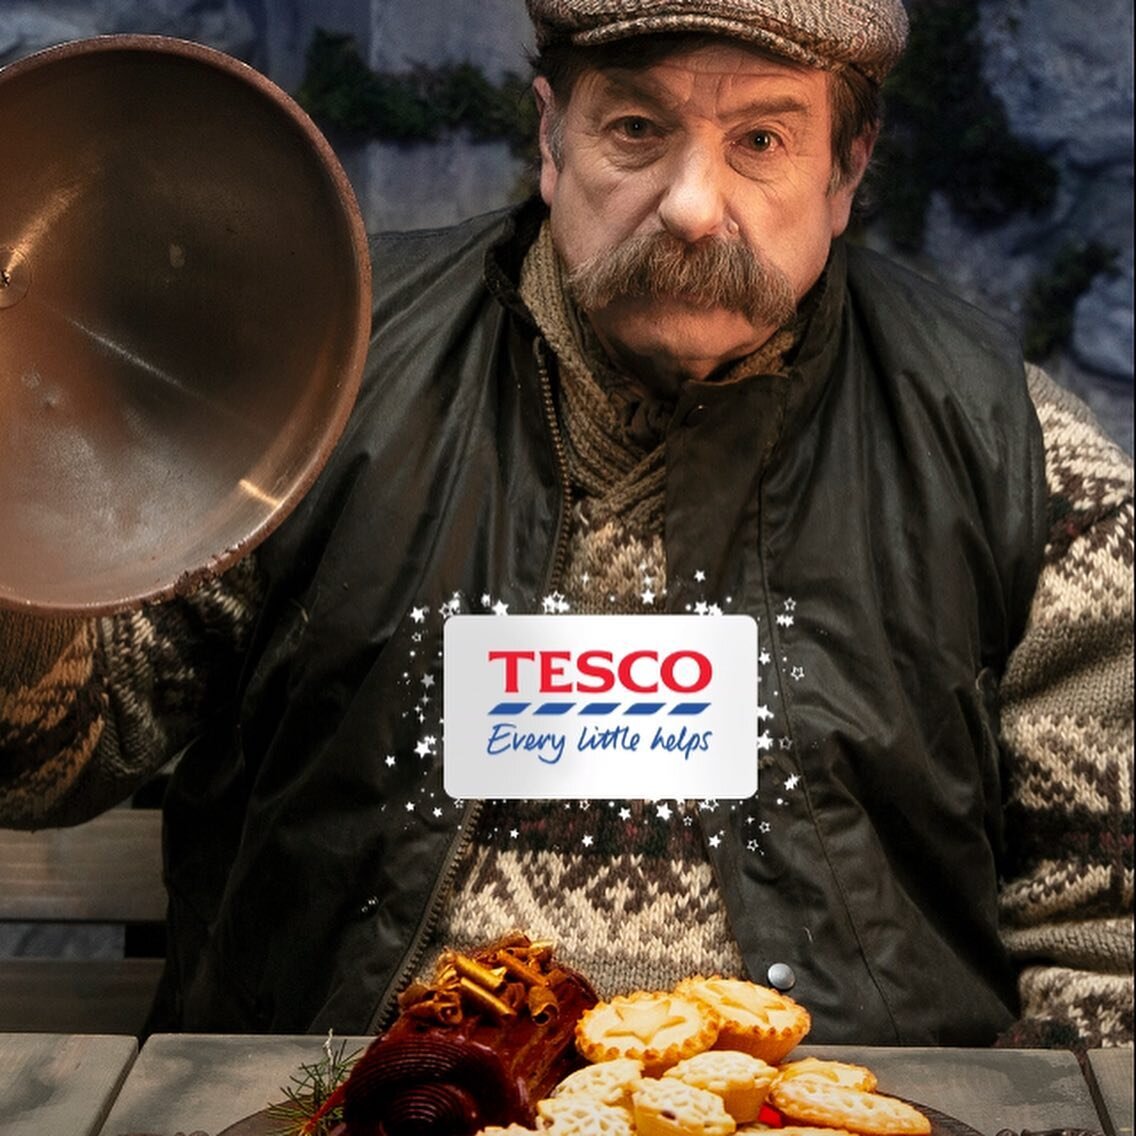 It has been a busy few weeks what with having a shoot at a certain Welsh castle with a mysterious kiosk owner.... 

Delighted to have been part of the team, shooting the #imacelebrity #Christmas campaign for @tescofood with Kiosk Cledwyn. 

#nonaught